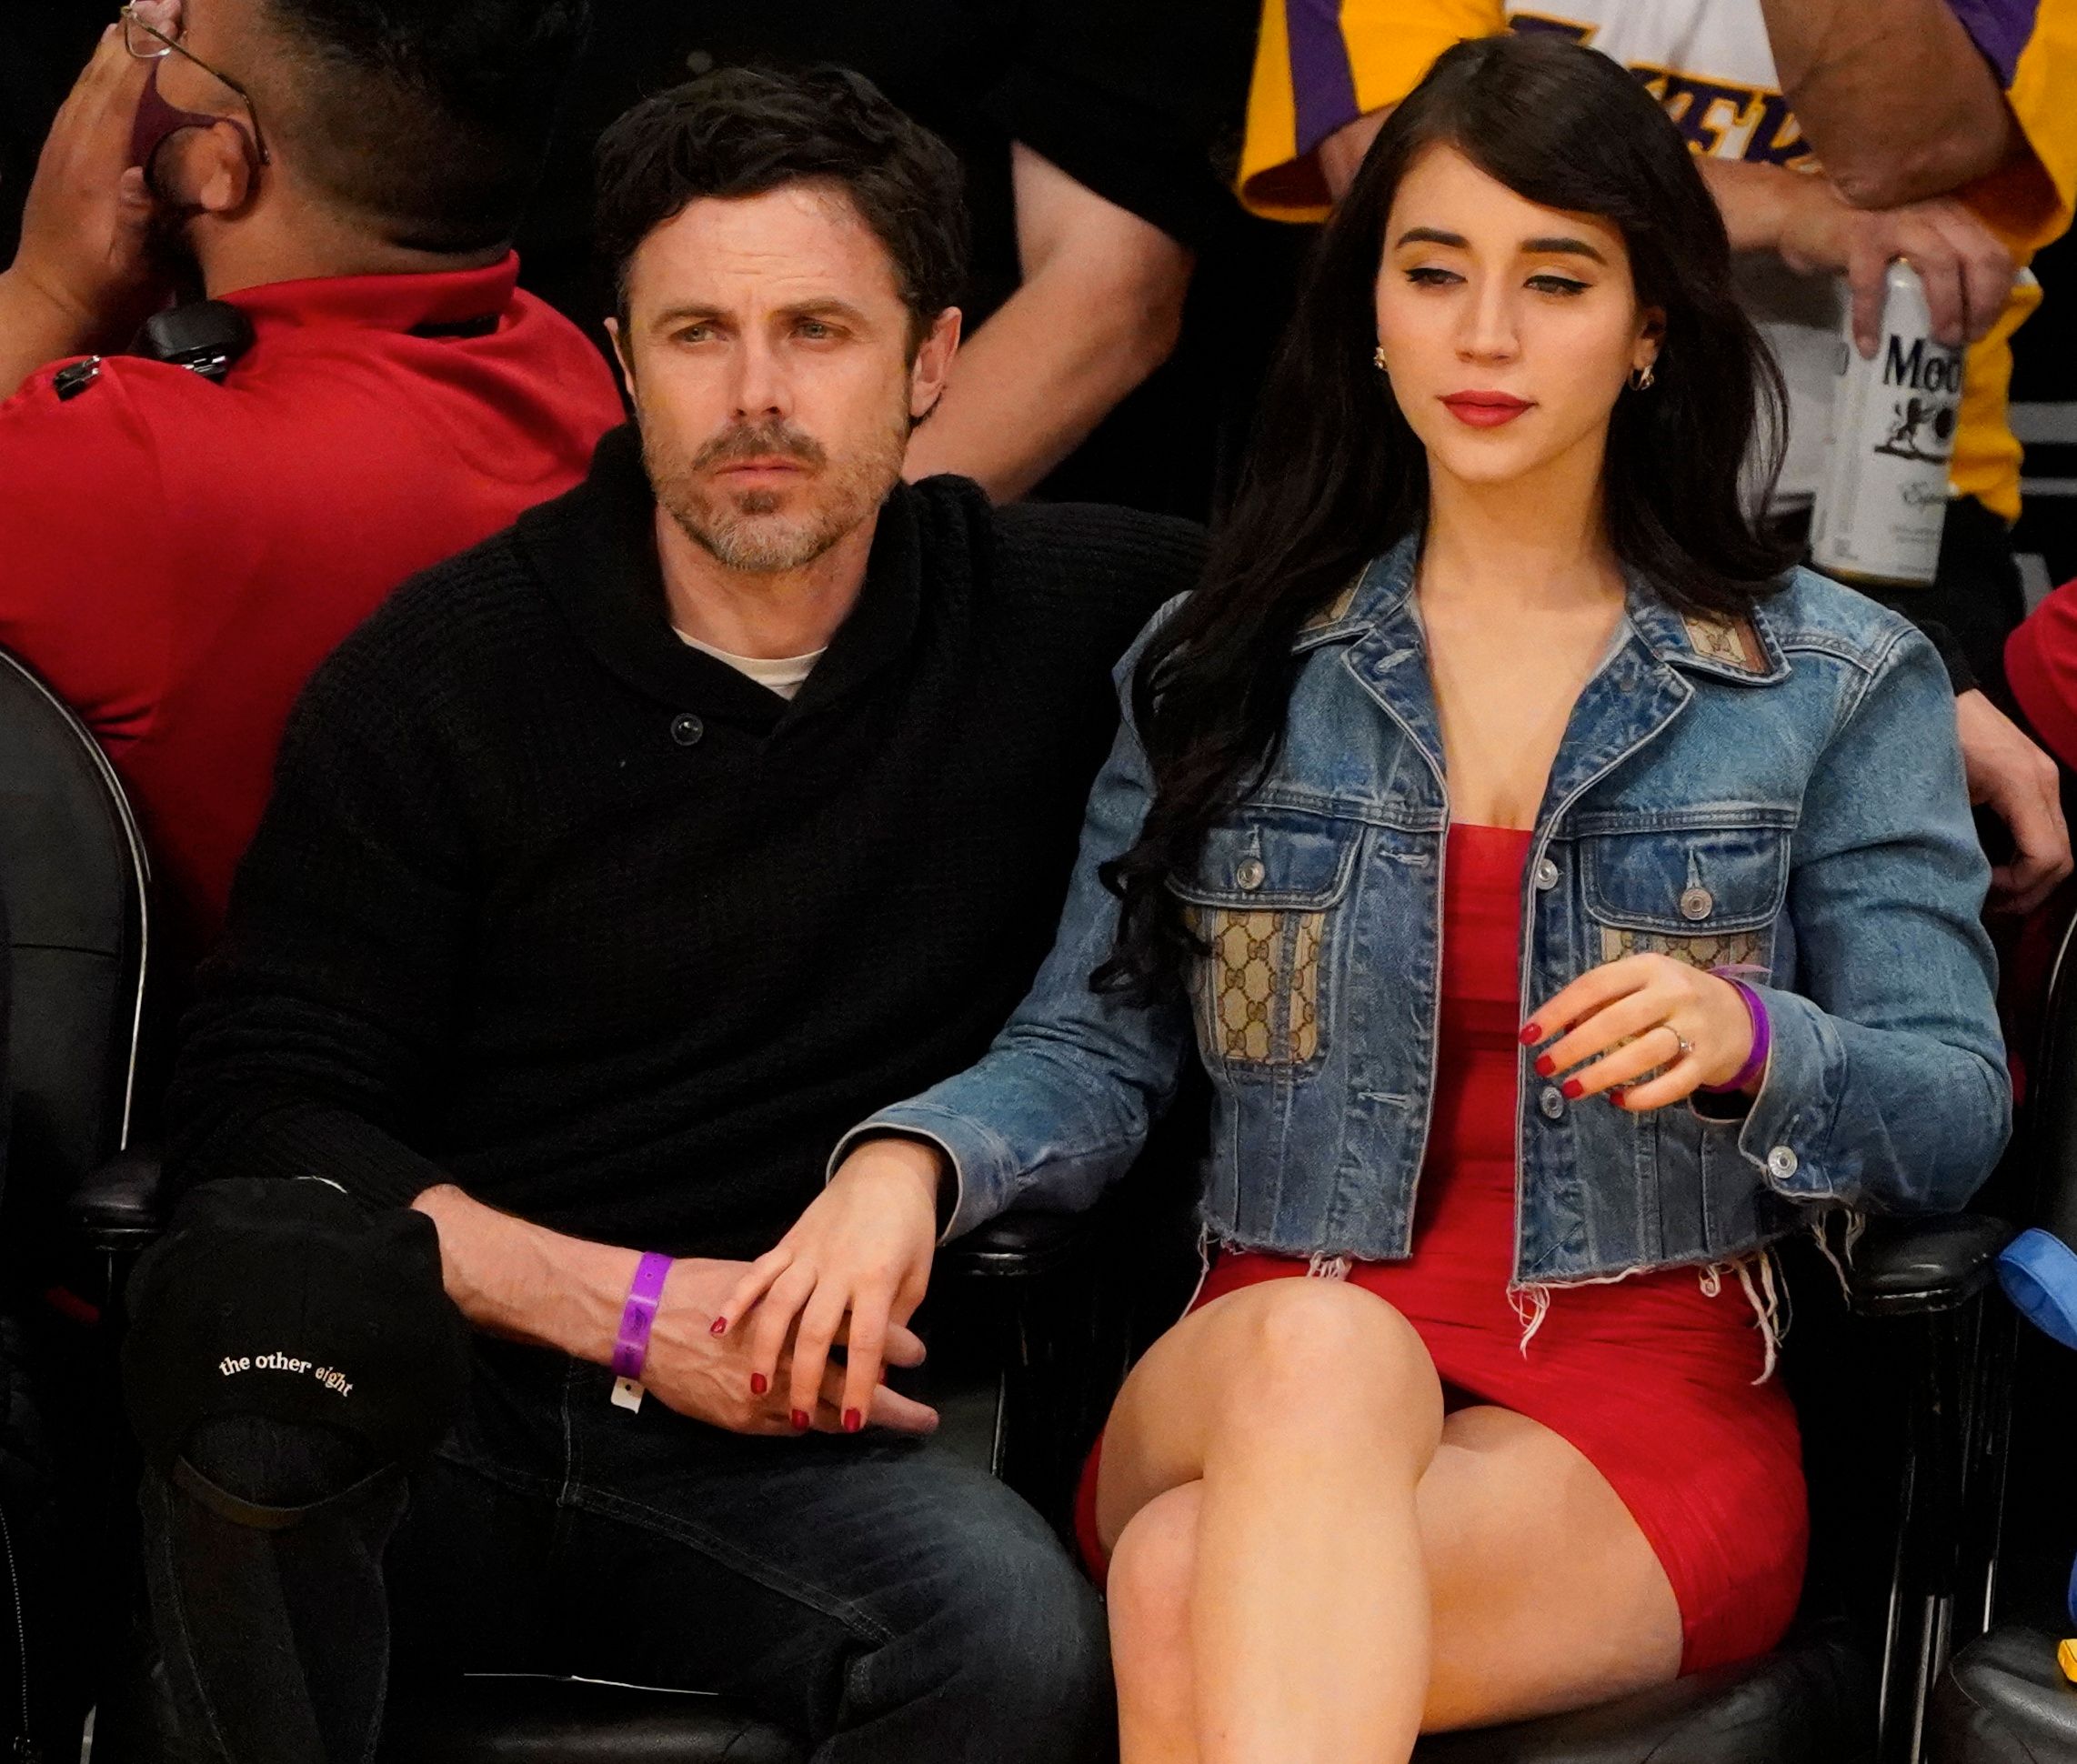 <p>Oscar winner Casey Affleck was photographed kissing his new girlfriend, actress Caylee Cowan (see the snaps <a href="https://pagesix.com/2021/11/24/casey-affleck-snapped-mid-pda-with-caylee-cowan-half-his-age/">here</a>) -- who at 23 is half his age -- on Nov. 23, 2021, and two days later called her "my love" who "always shows up when it counts" in an Instagram post. Caylee was born in 1998 -- two years before Casey started dating first wife Summer Phoenix, from whom he split in 2015 after nearly a decade of marriage and two kids together.</p>